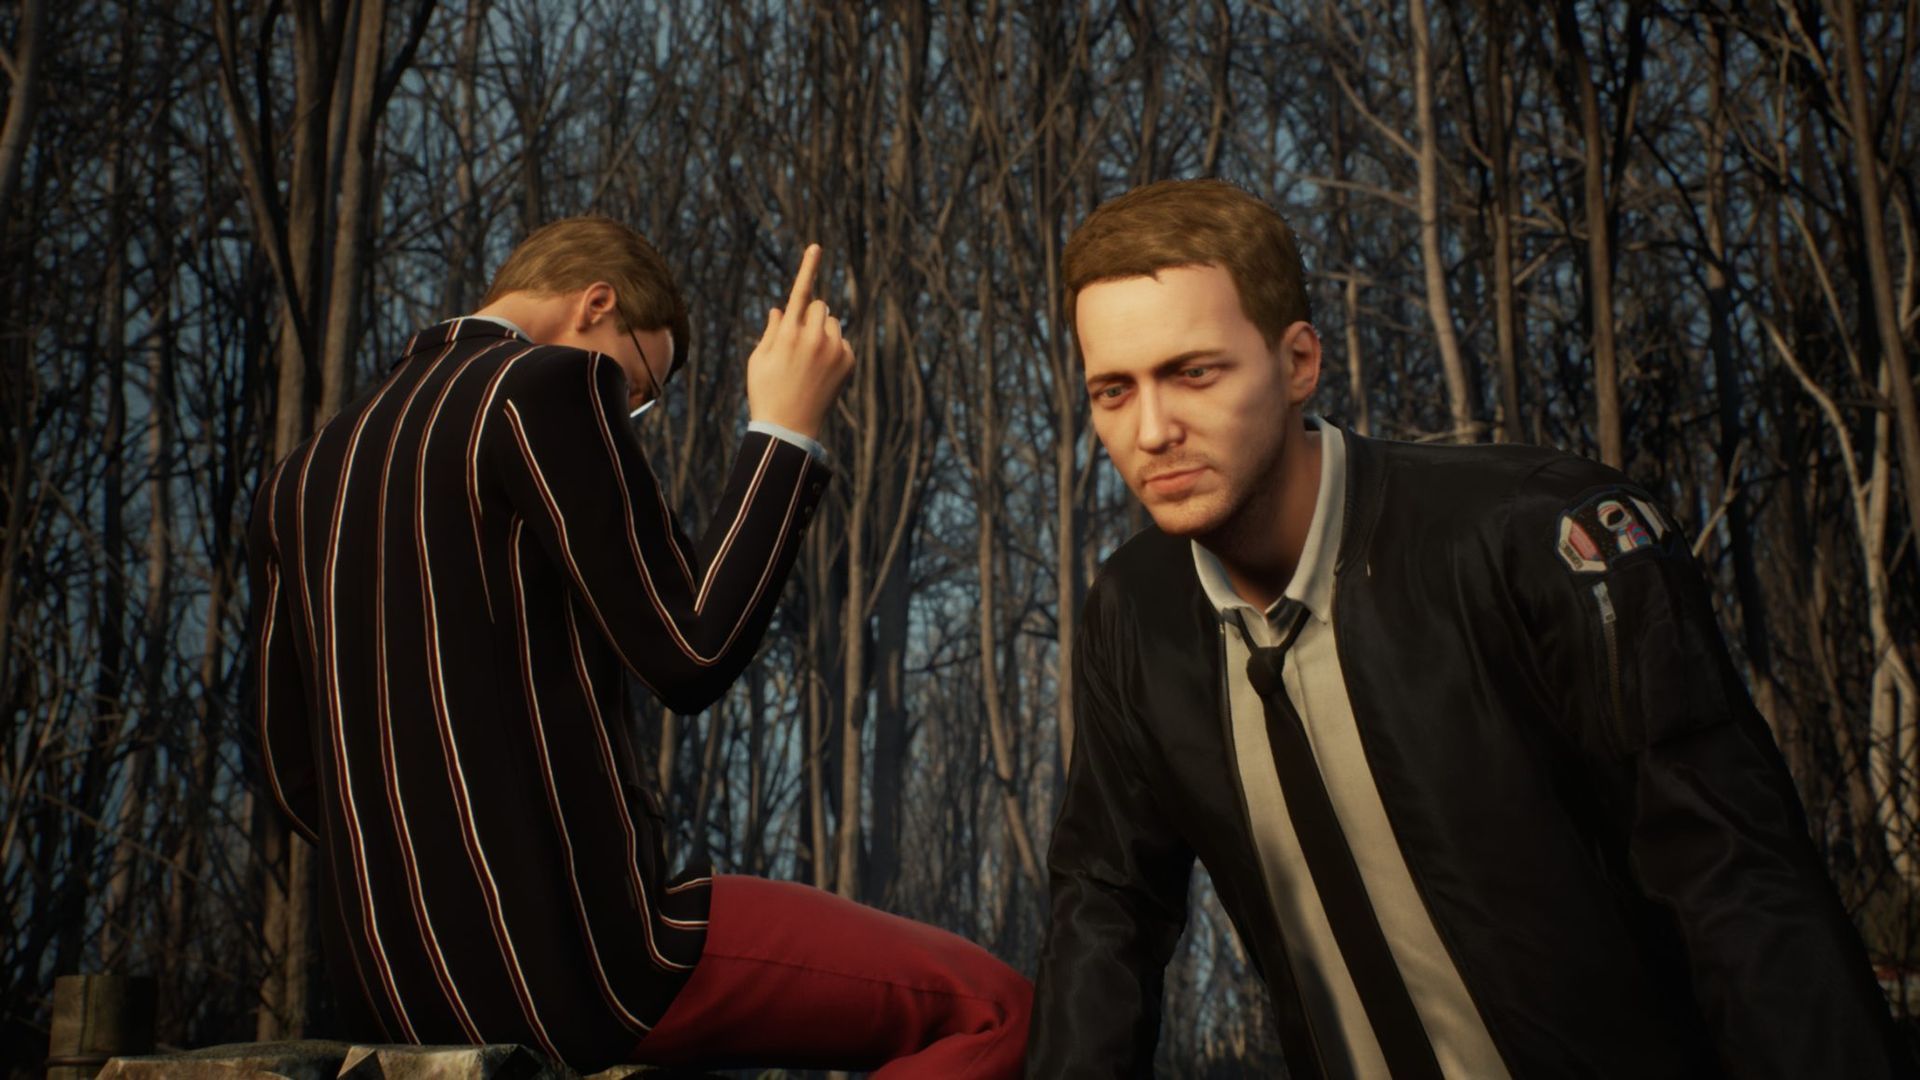 Twin Mirror, Dontnod's new thriller, has been totally redesigned in new trailer